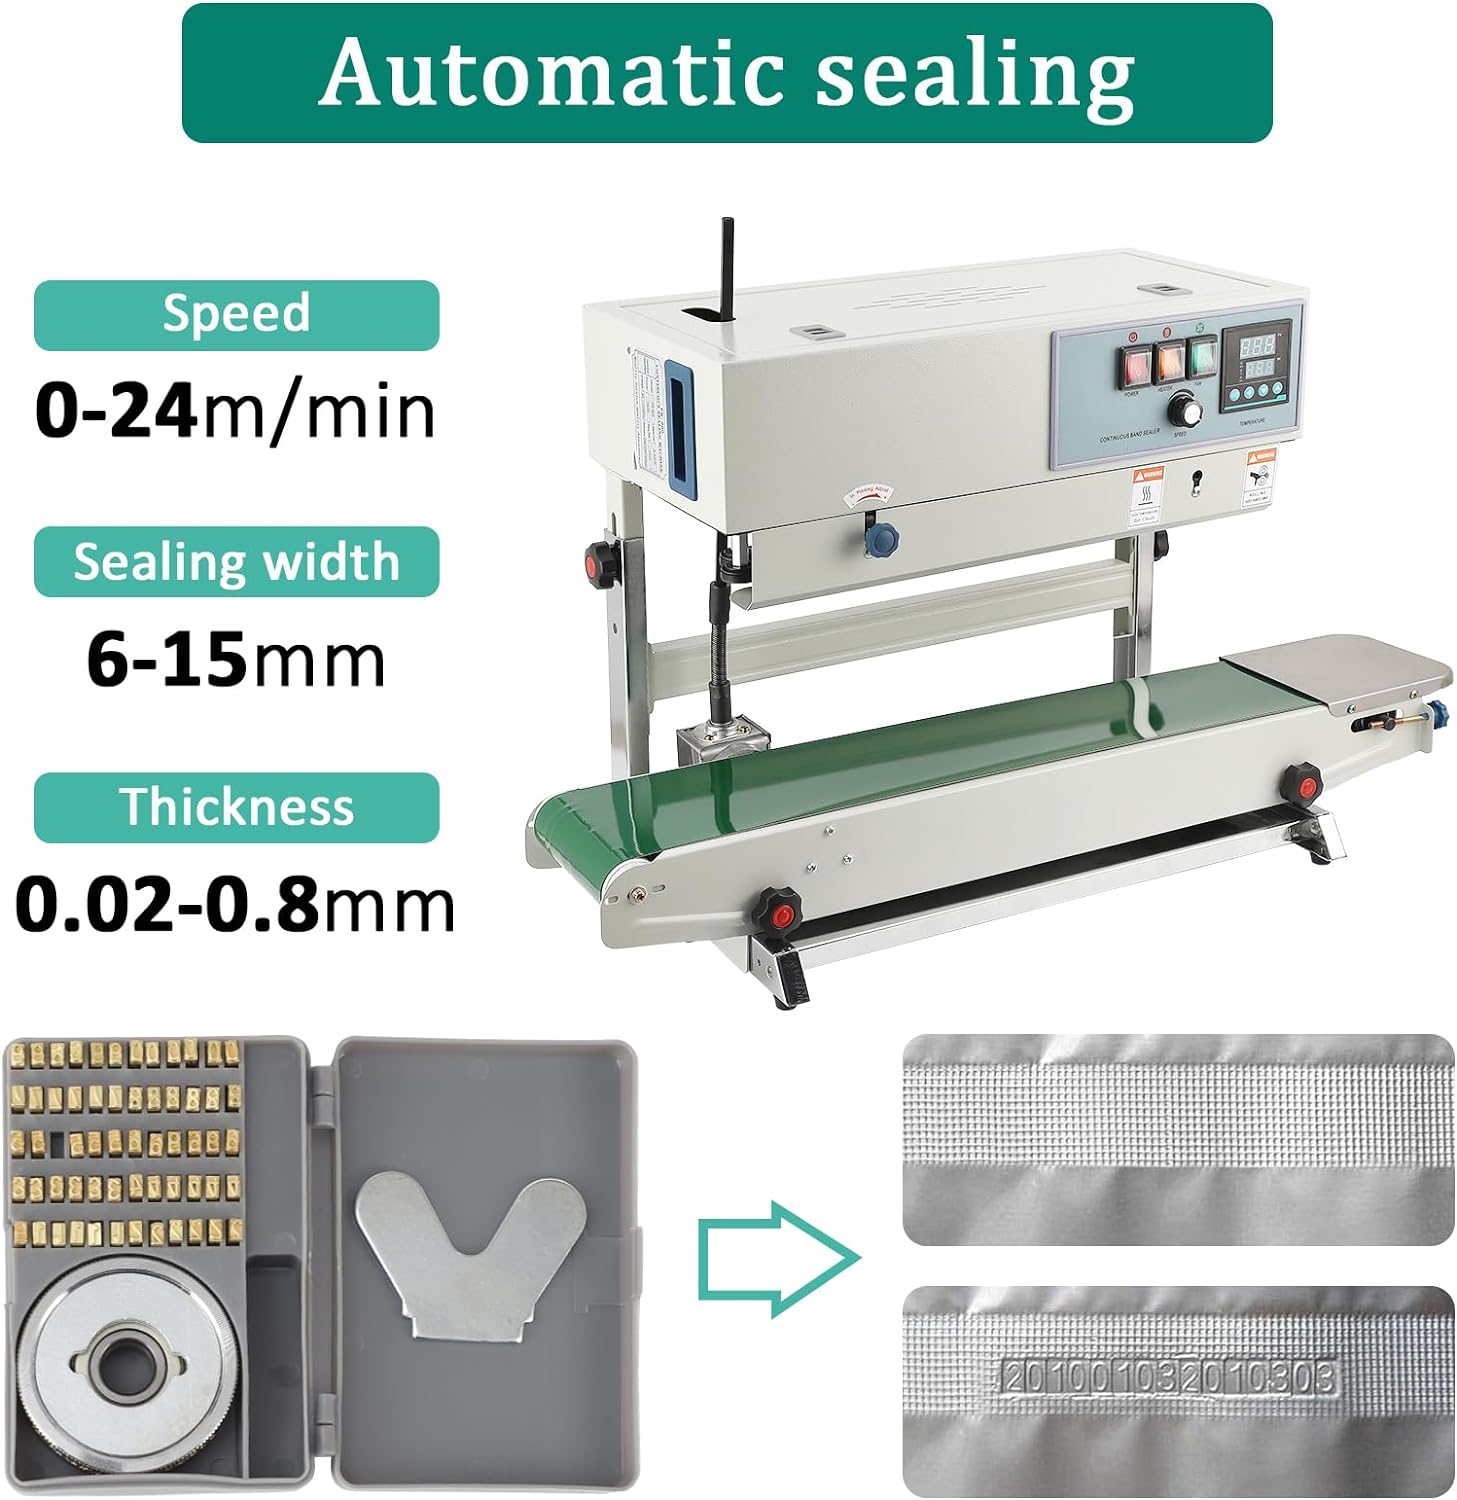 Band Sealer, Vertical Continuous Band Sealer FR-900, Automatic Continuous Sealing Machine with Digital Temperature Control, Commercial PP Aluminum Foil PVC Plastic Bag Band Sealing Machine